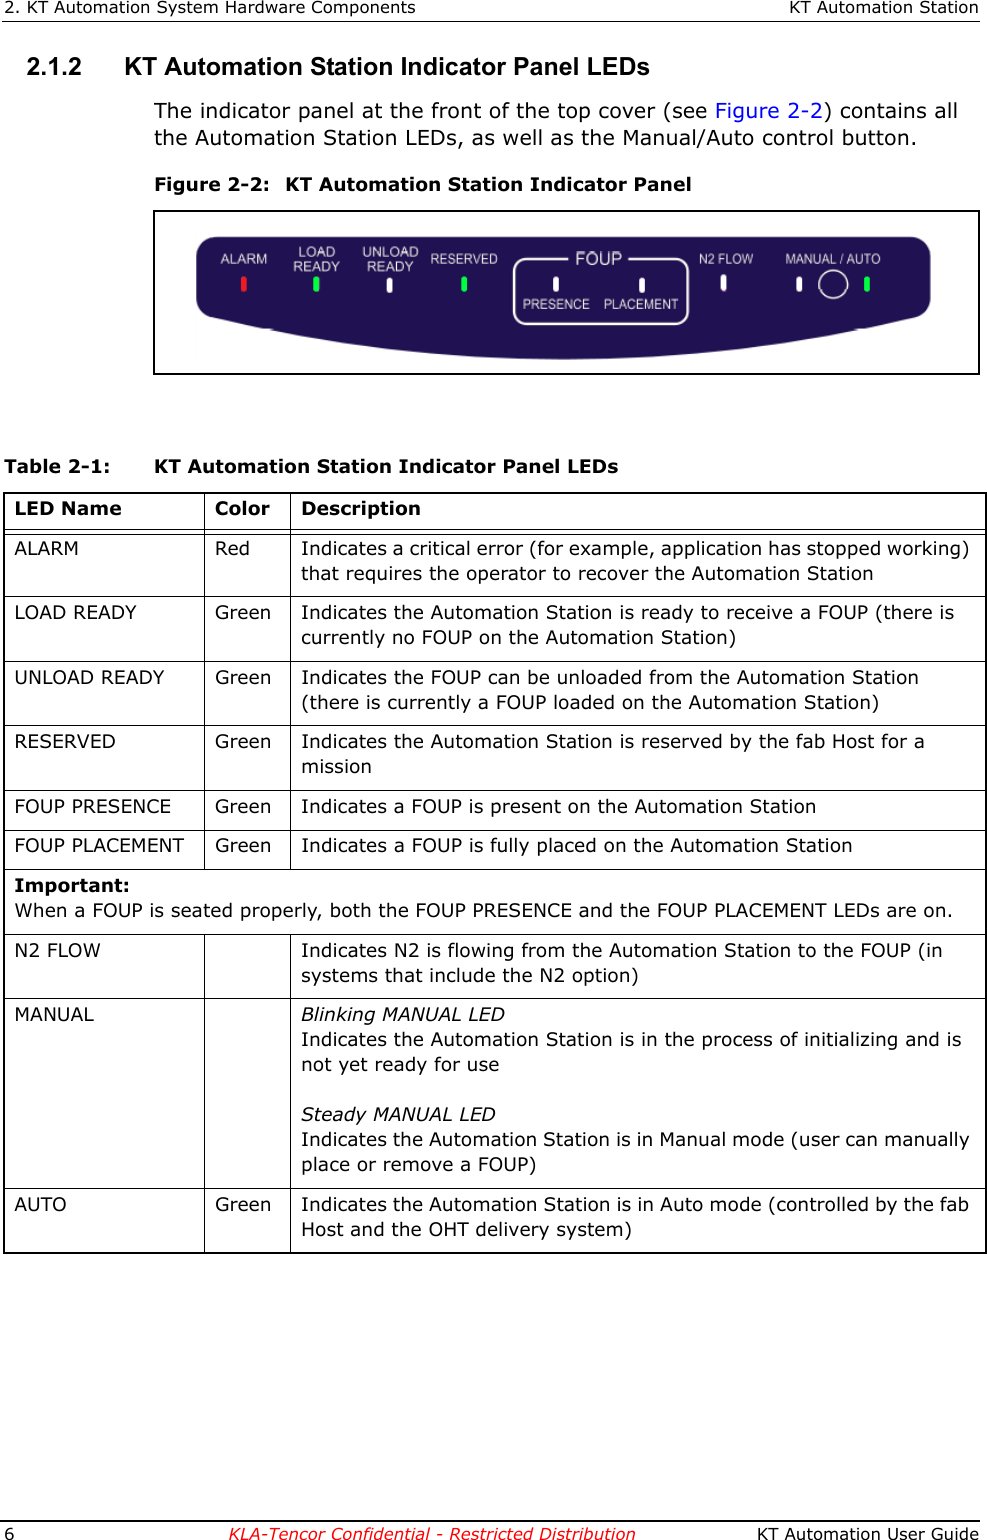 2. KT Automation System Hardware Components KT Automation Station6KLA-Tencor Confidential - Restricted Distribution  KT Automation User Guide2.1.2 KT Automation Station Indicator Panel LEDsThe indicator panel at the front of the top cover (see Figure 2-2) contains all the Automation Station LEDs, as well as the Manual/Auto control button. Figure 2-2: KT Automation Station Indicator PanelTable 2-1: KT Automation Station Indicator Panel LEDsLED Name Color DescriptionALARM Red Indicates a critical error (for example, application has stopped working) that requires the operator to recover the Automation StationLOAD READY Green Indicates the Automation Station is ready to receive a FOUP (there is currently no FOUP on the Automation Station)UNLOAD READY Green Indicates the FOUP can be unloaded from the Automation Station (there is currently a FOUP loaded on the Automation Station)RESERVED Green Indicates the Automation Station is reserved by the fab Host for a missionFOUP PRESENCE Green Indicates a FOUP is present on the Automation StationFOUP PLACEMENT Green Indicates a FOUP is fully placed on the Automation StationImportant: When a FOUP is seated properly, both the FOUP PRESENCE and the FOUP PLACEMENT LEDs are on.N2 FLOW Indicates N2 is flowing from the Automation Station to the FOUP (in systems that include the N2 option)MANUAL Blinking MANUAL LEDIndicates the Automation Station is in the process of initializing and is not yet ready for useSteady MANUAL LEDIndicates the Automation Station is in Manual mode (user can manually place or remove a FOUP)AUTO Green Indicates the Automation Station is in Auto mode (controlled by the fab Host and the OHT delivery system)